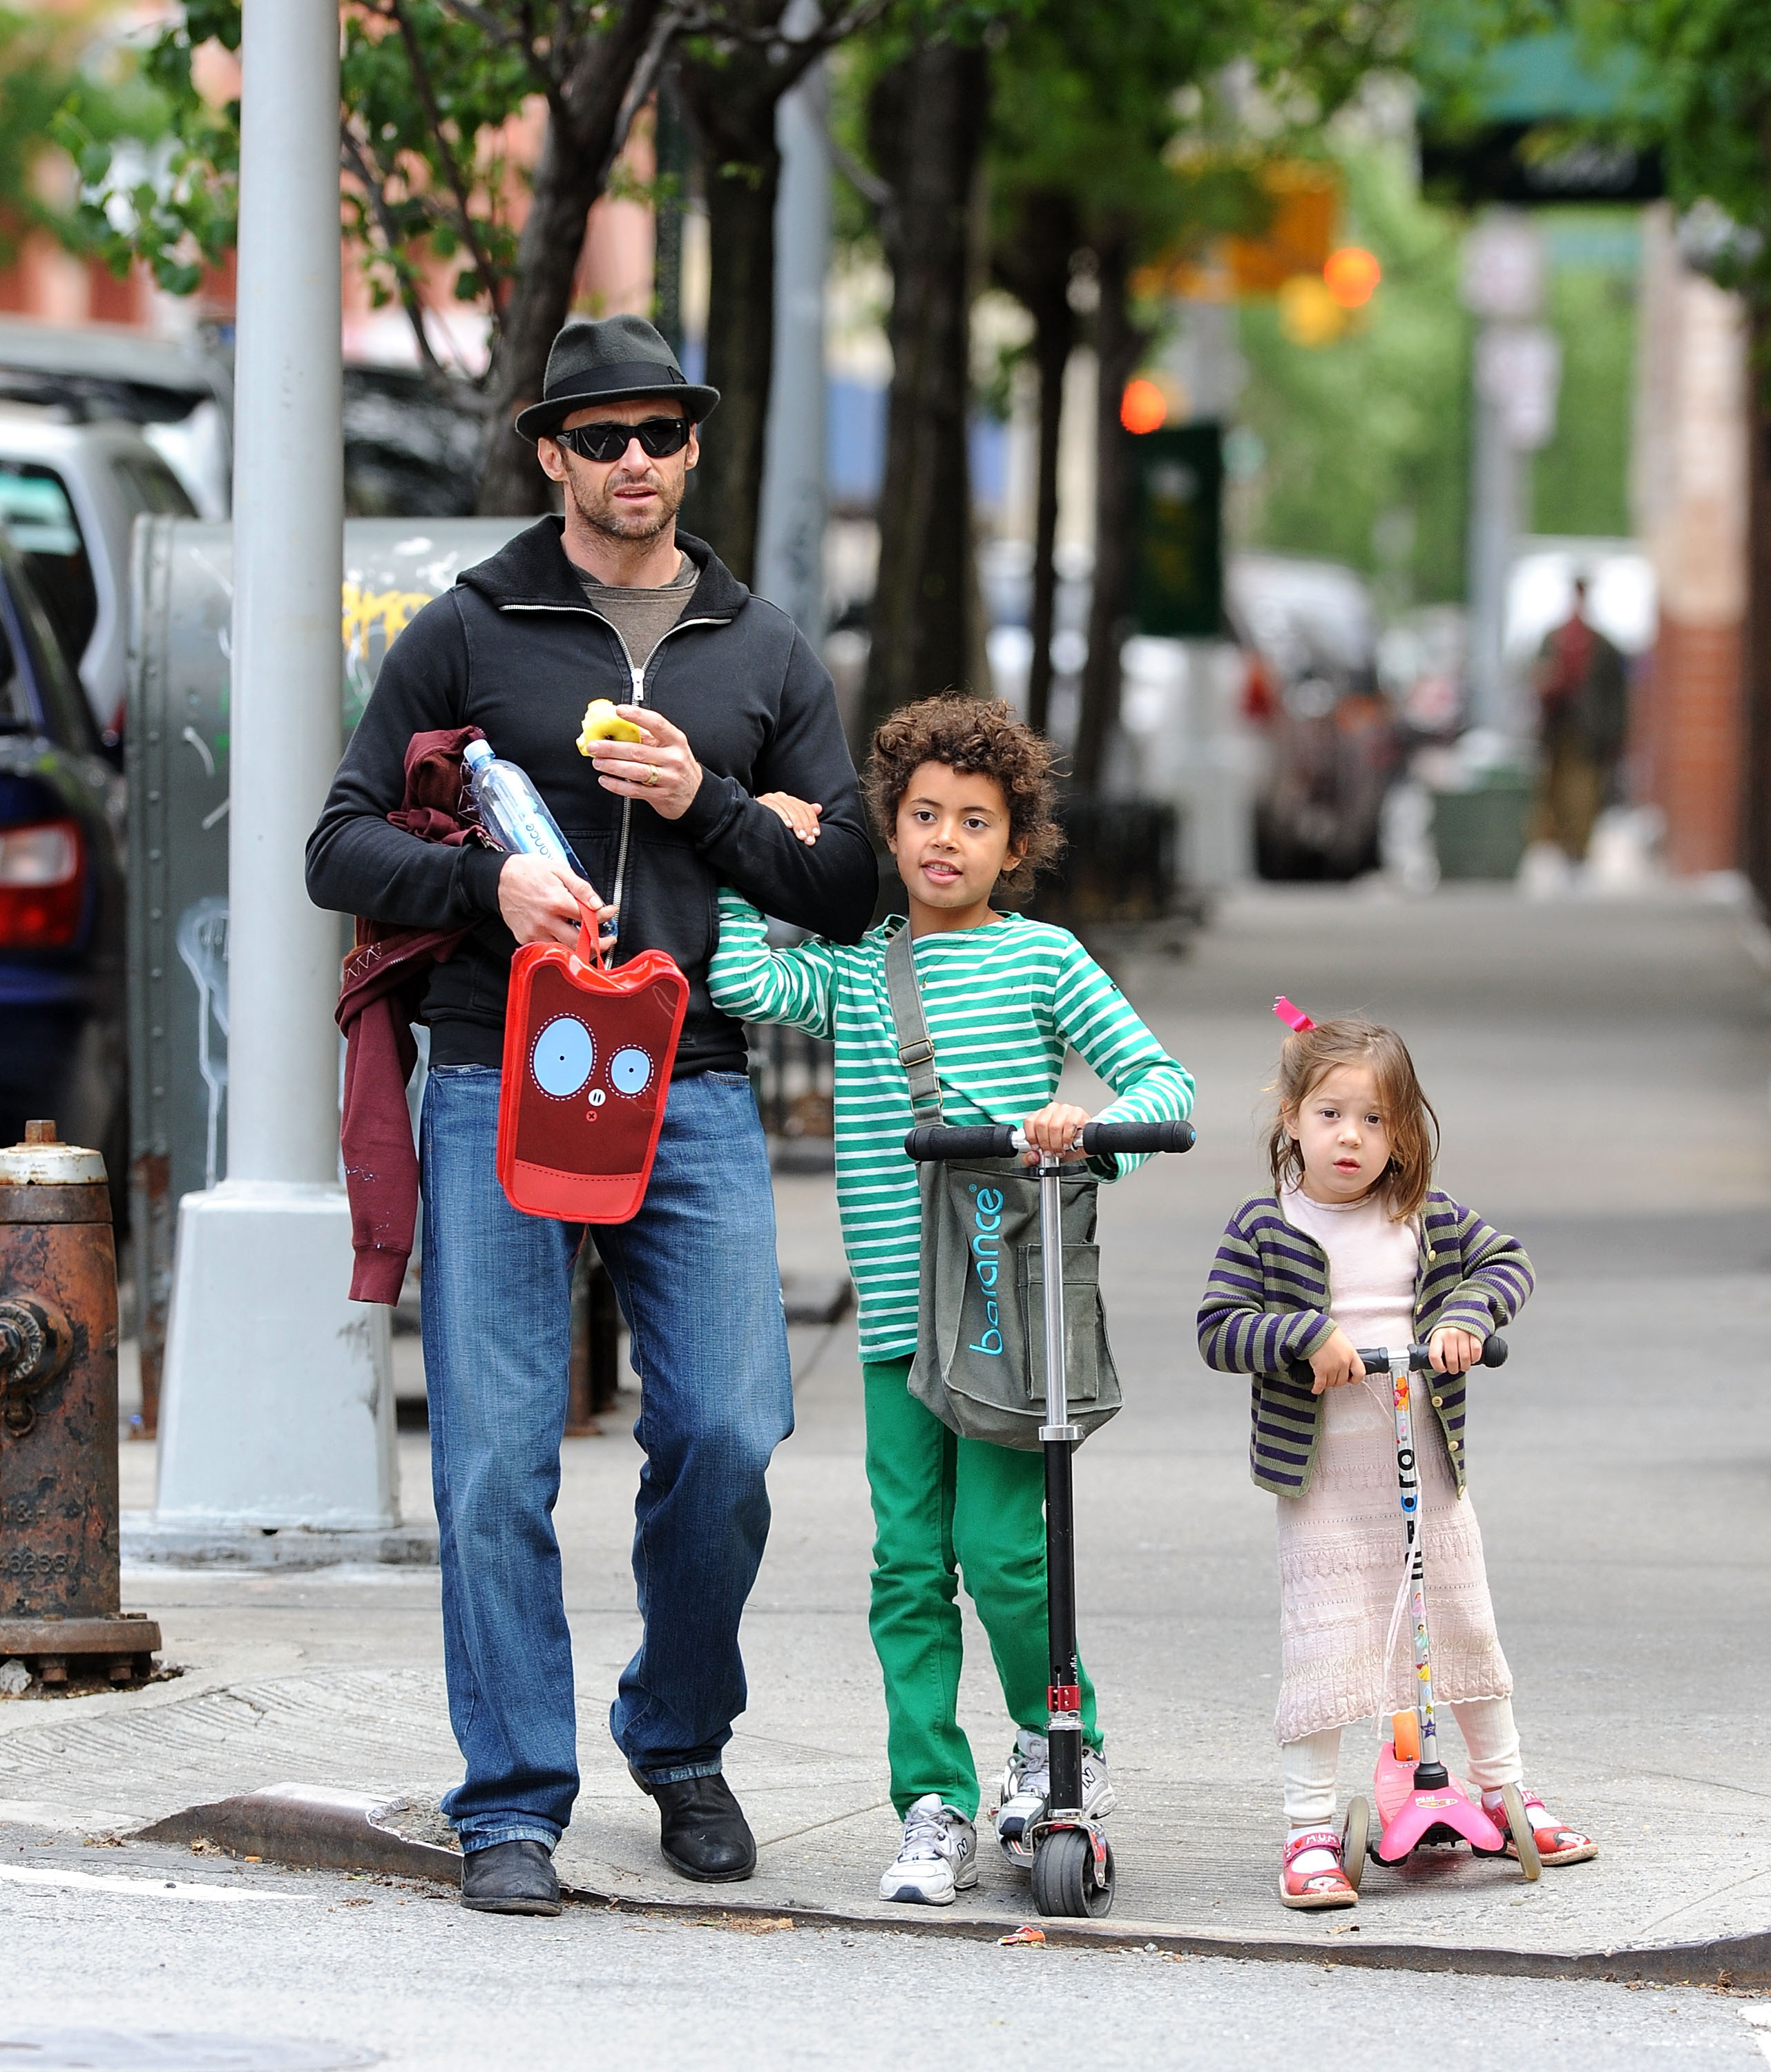 Hugh Jackman, Oscar Maximilian Jackman, and Ava Eliot Jackman snapped by paparazzi in New York City, 2009 | Source: Getty Images